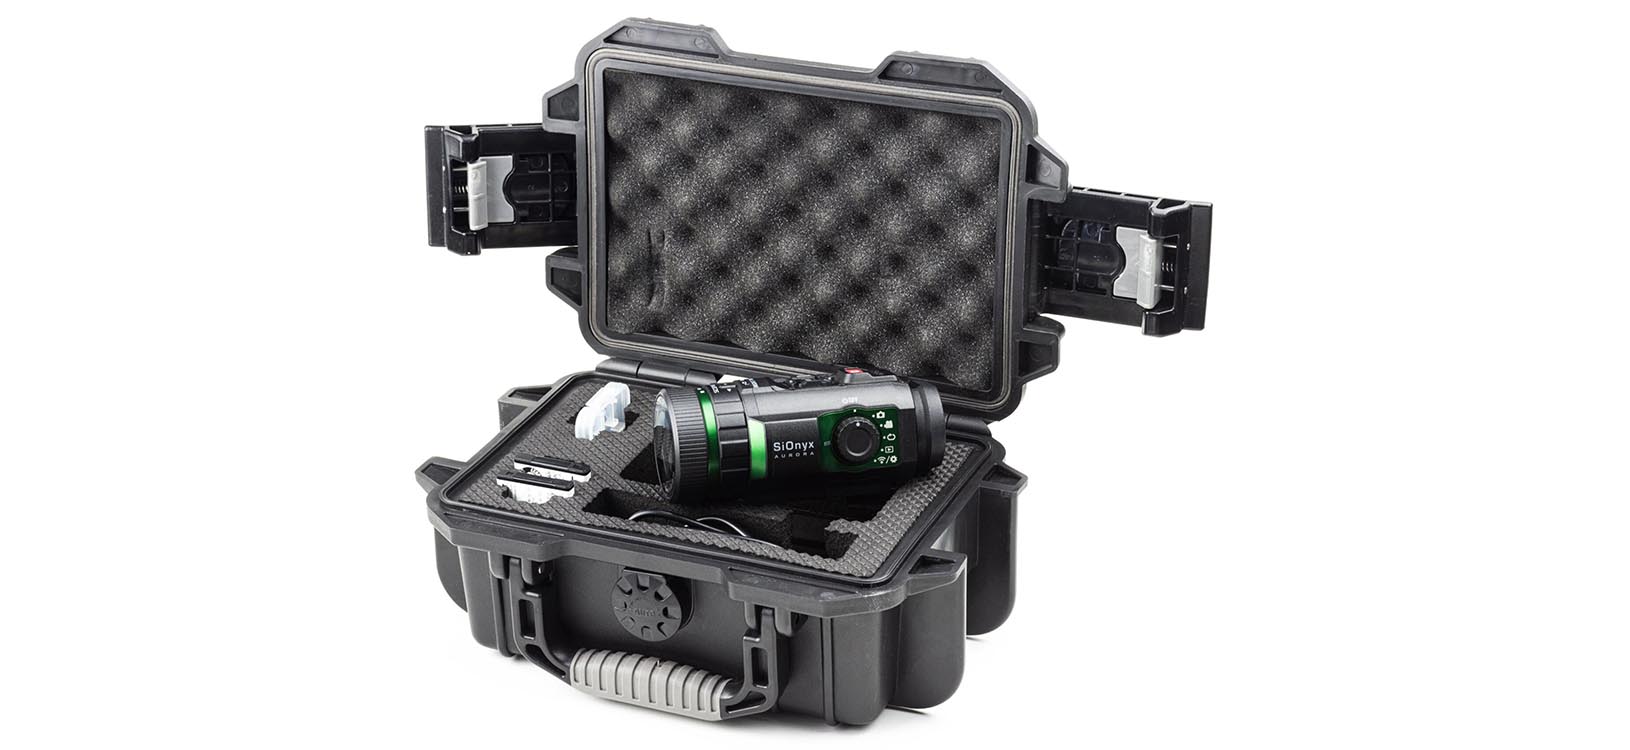 How to choose the night vision case